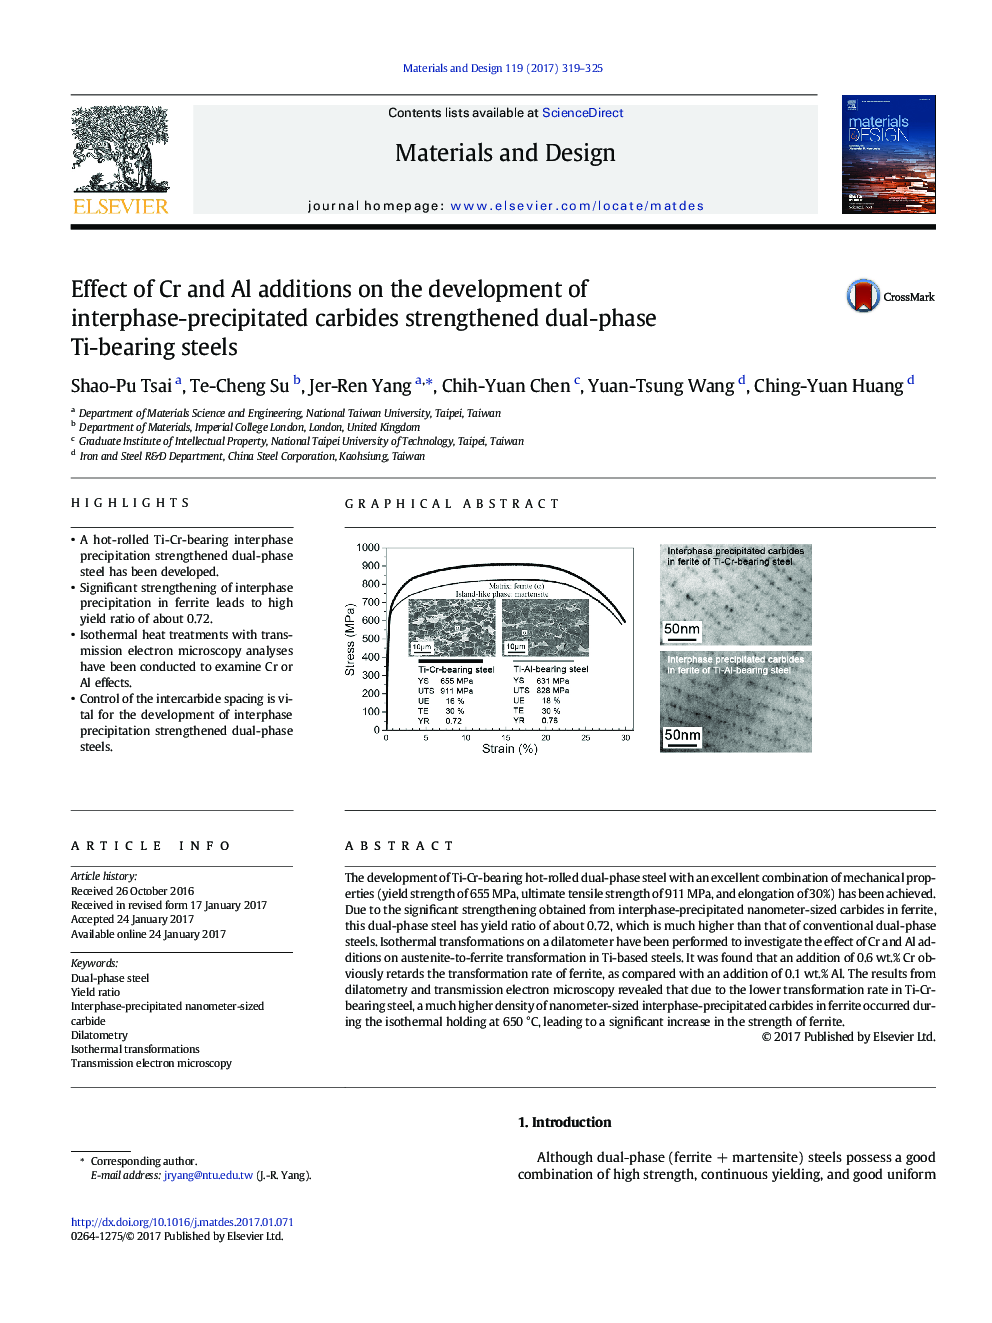 Effect of Cr and Al additions on the development of interphase-precipitated carbides strengthened dual-phase Ti-bearing steels